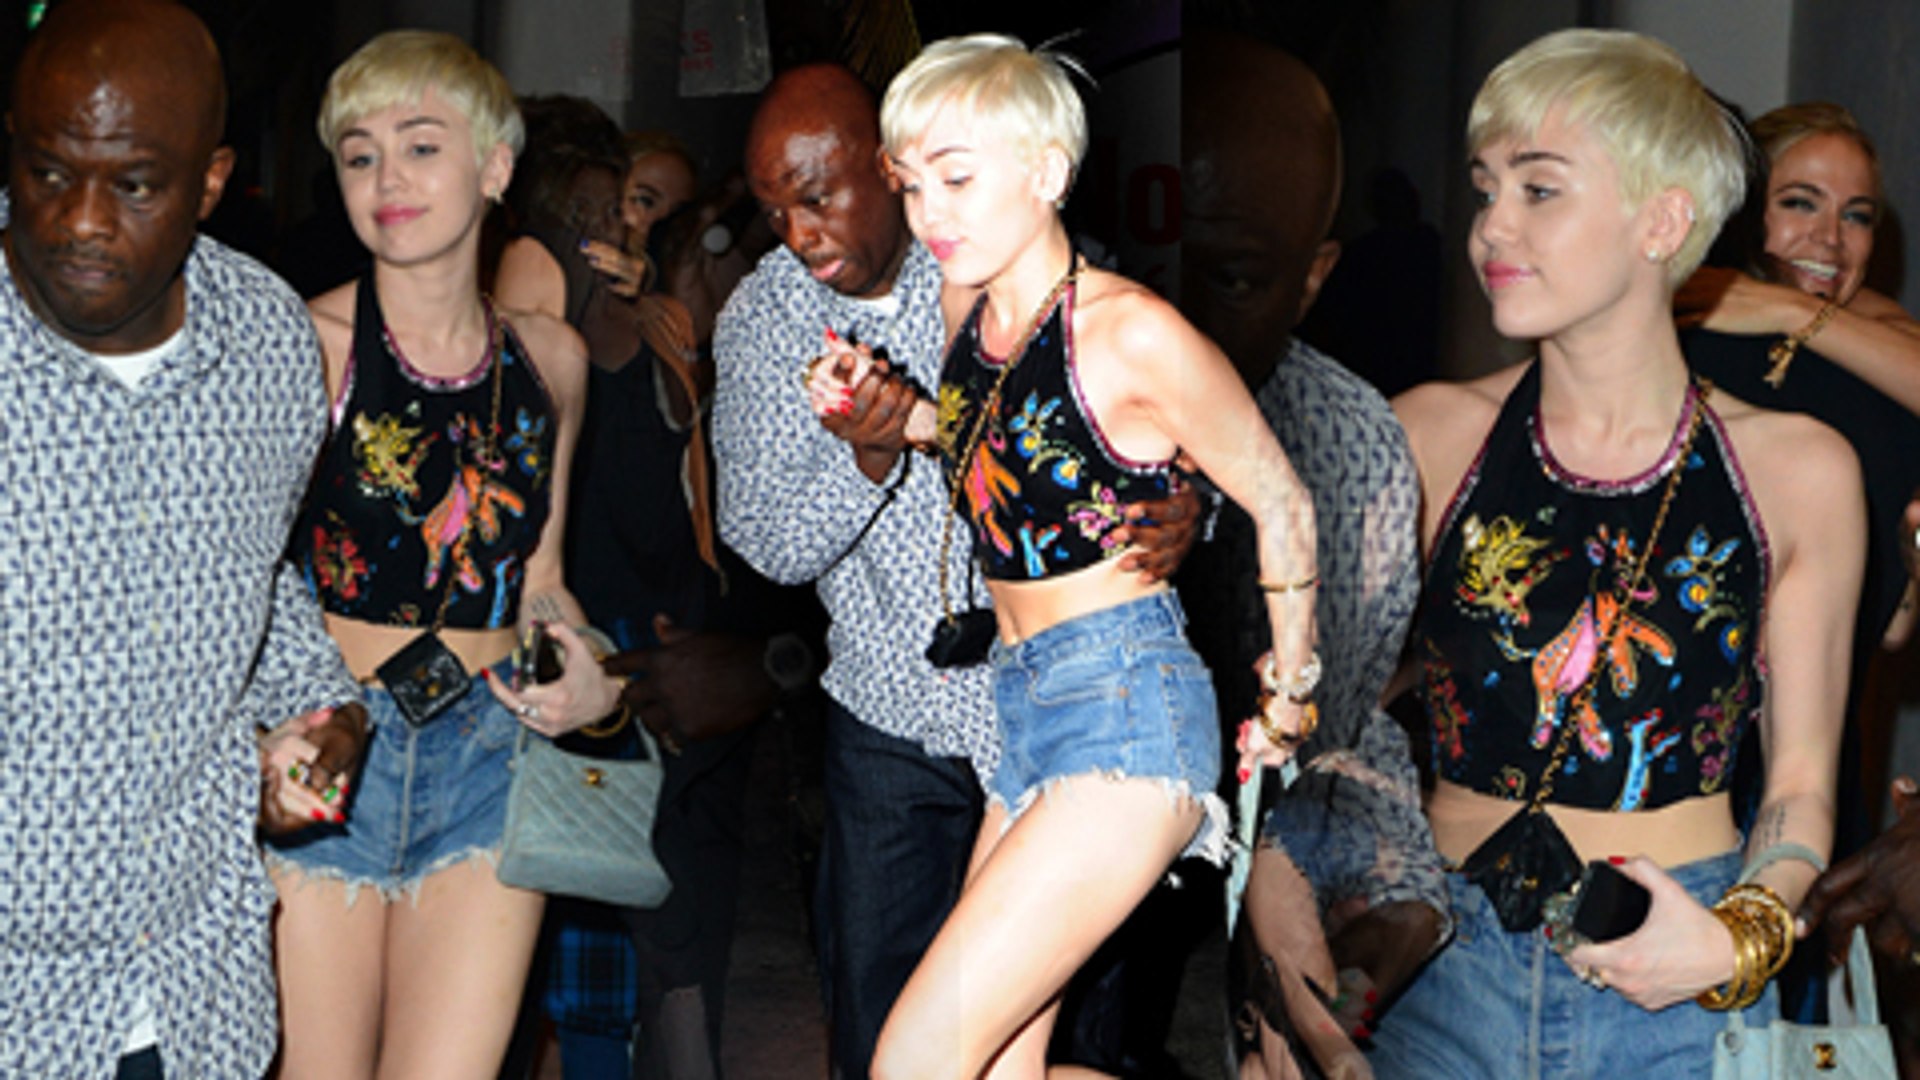 Miley Cyrus FLAUNTS Short Hot Pants In Miami - Hot Or Not?